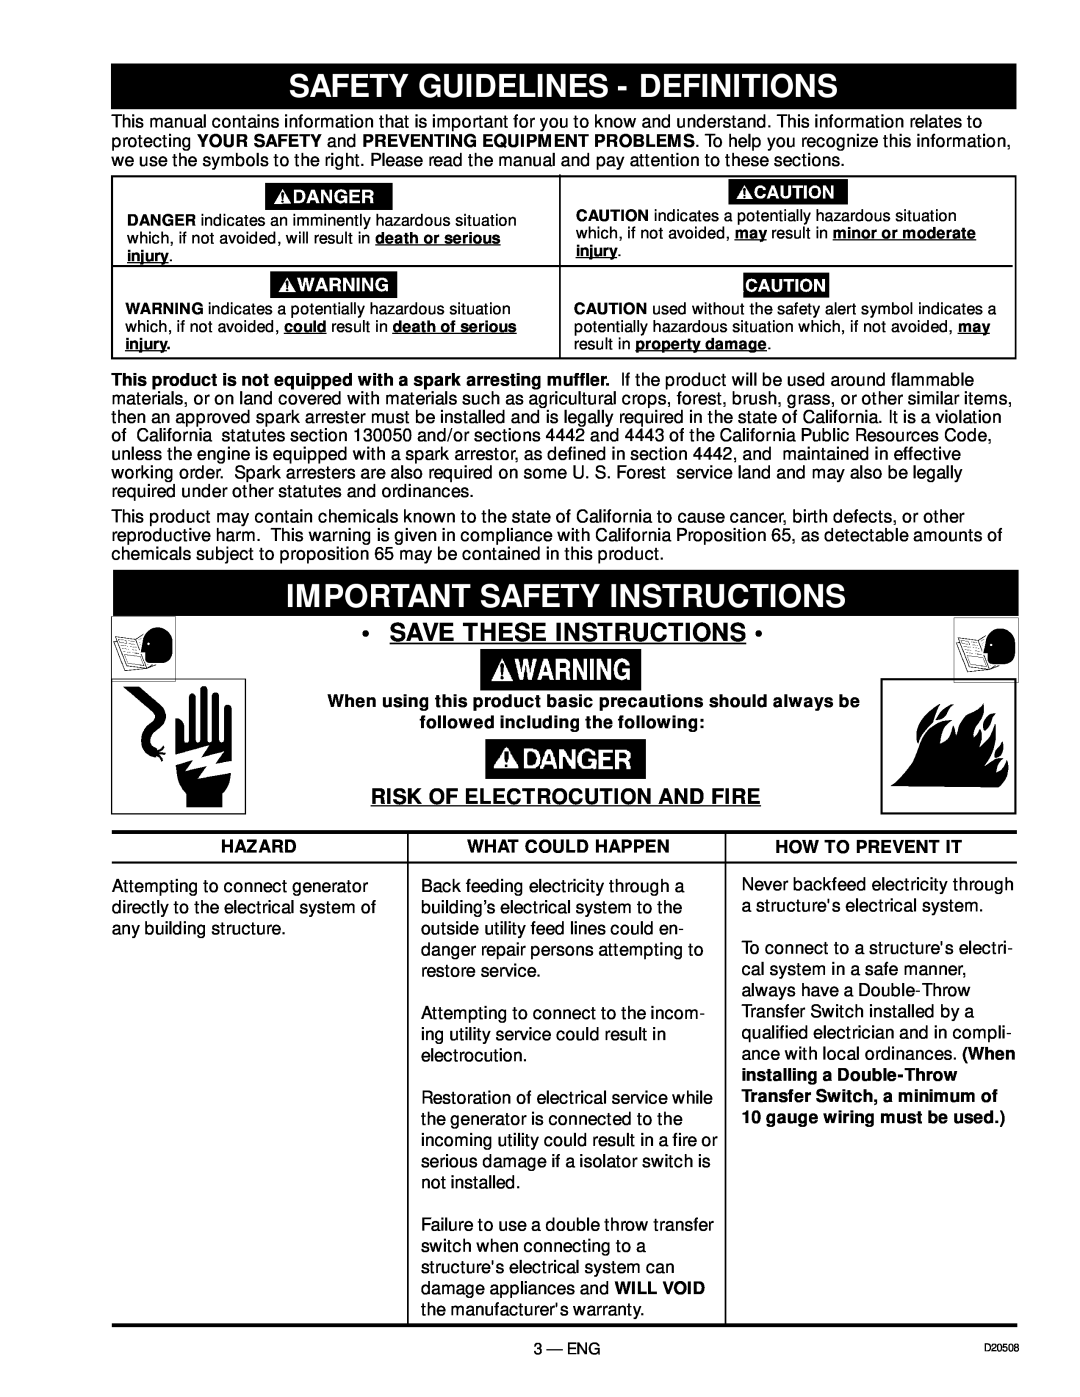 Sears 919.329110, D20508 Safety Guidelines - Definitions, Important Safety Instructions, Save These Instructions 